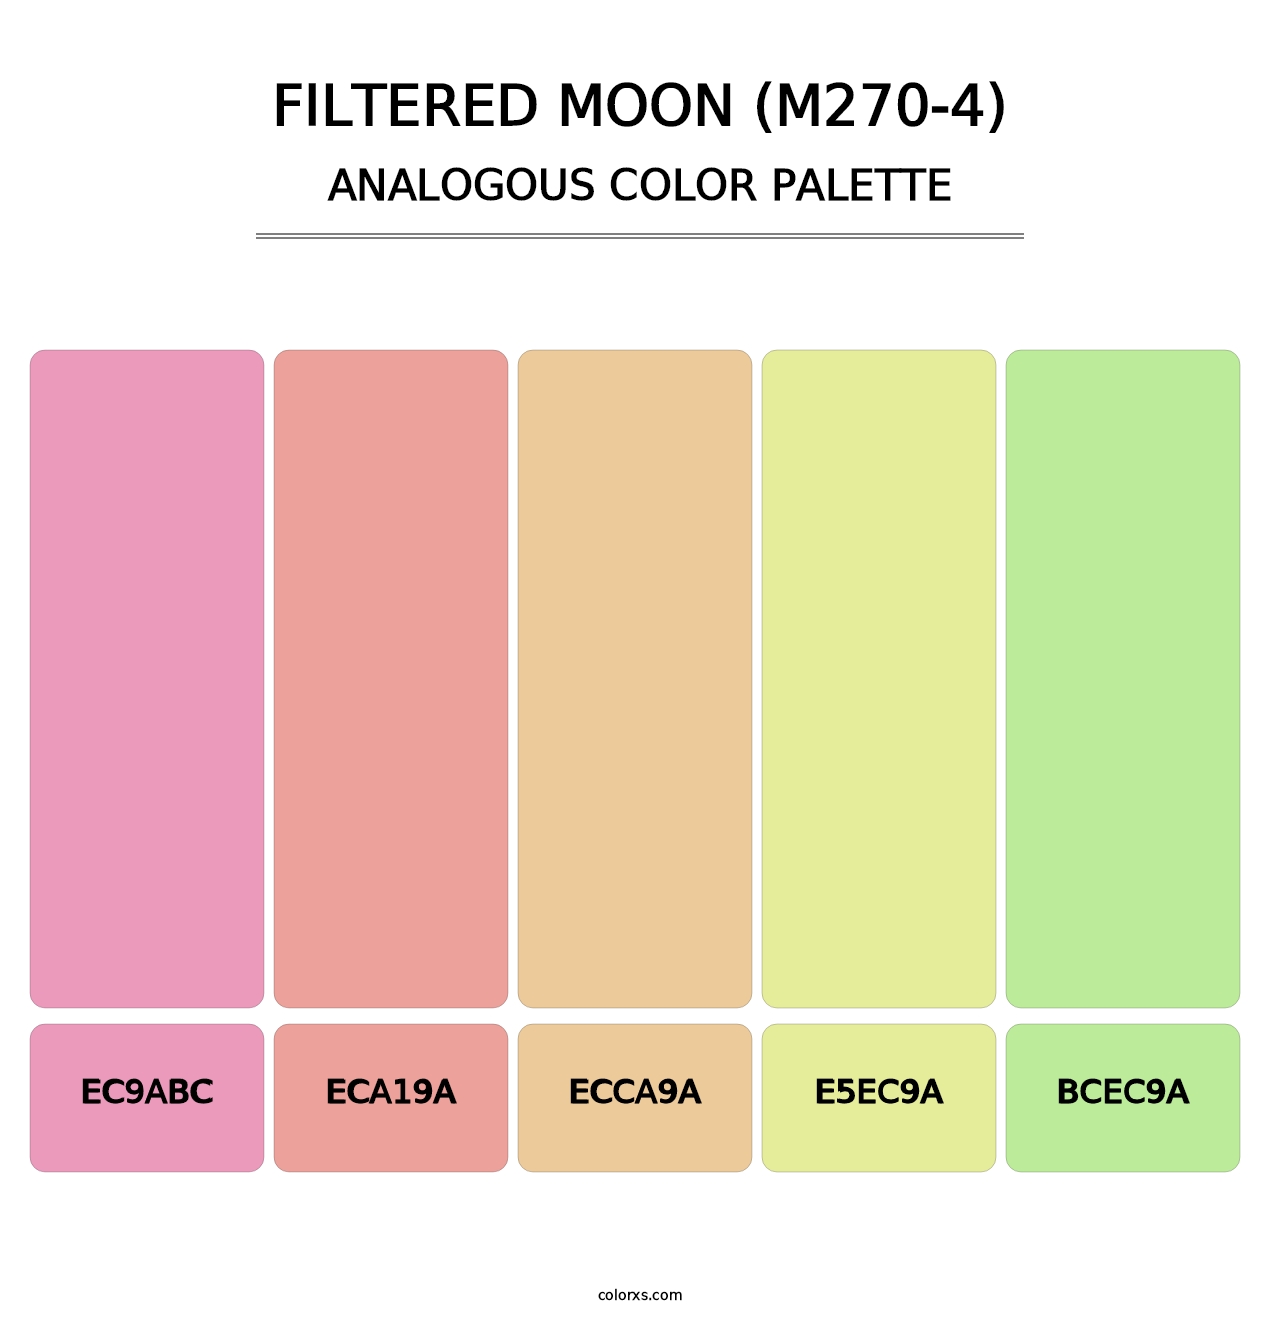 Filtered Moon (M270-4) - Analogous Color Palette